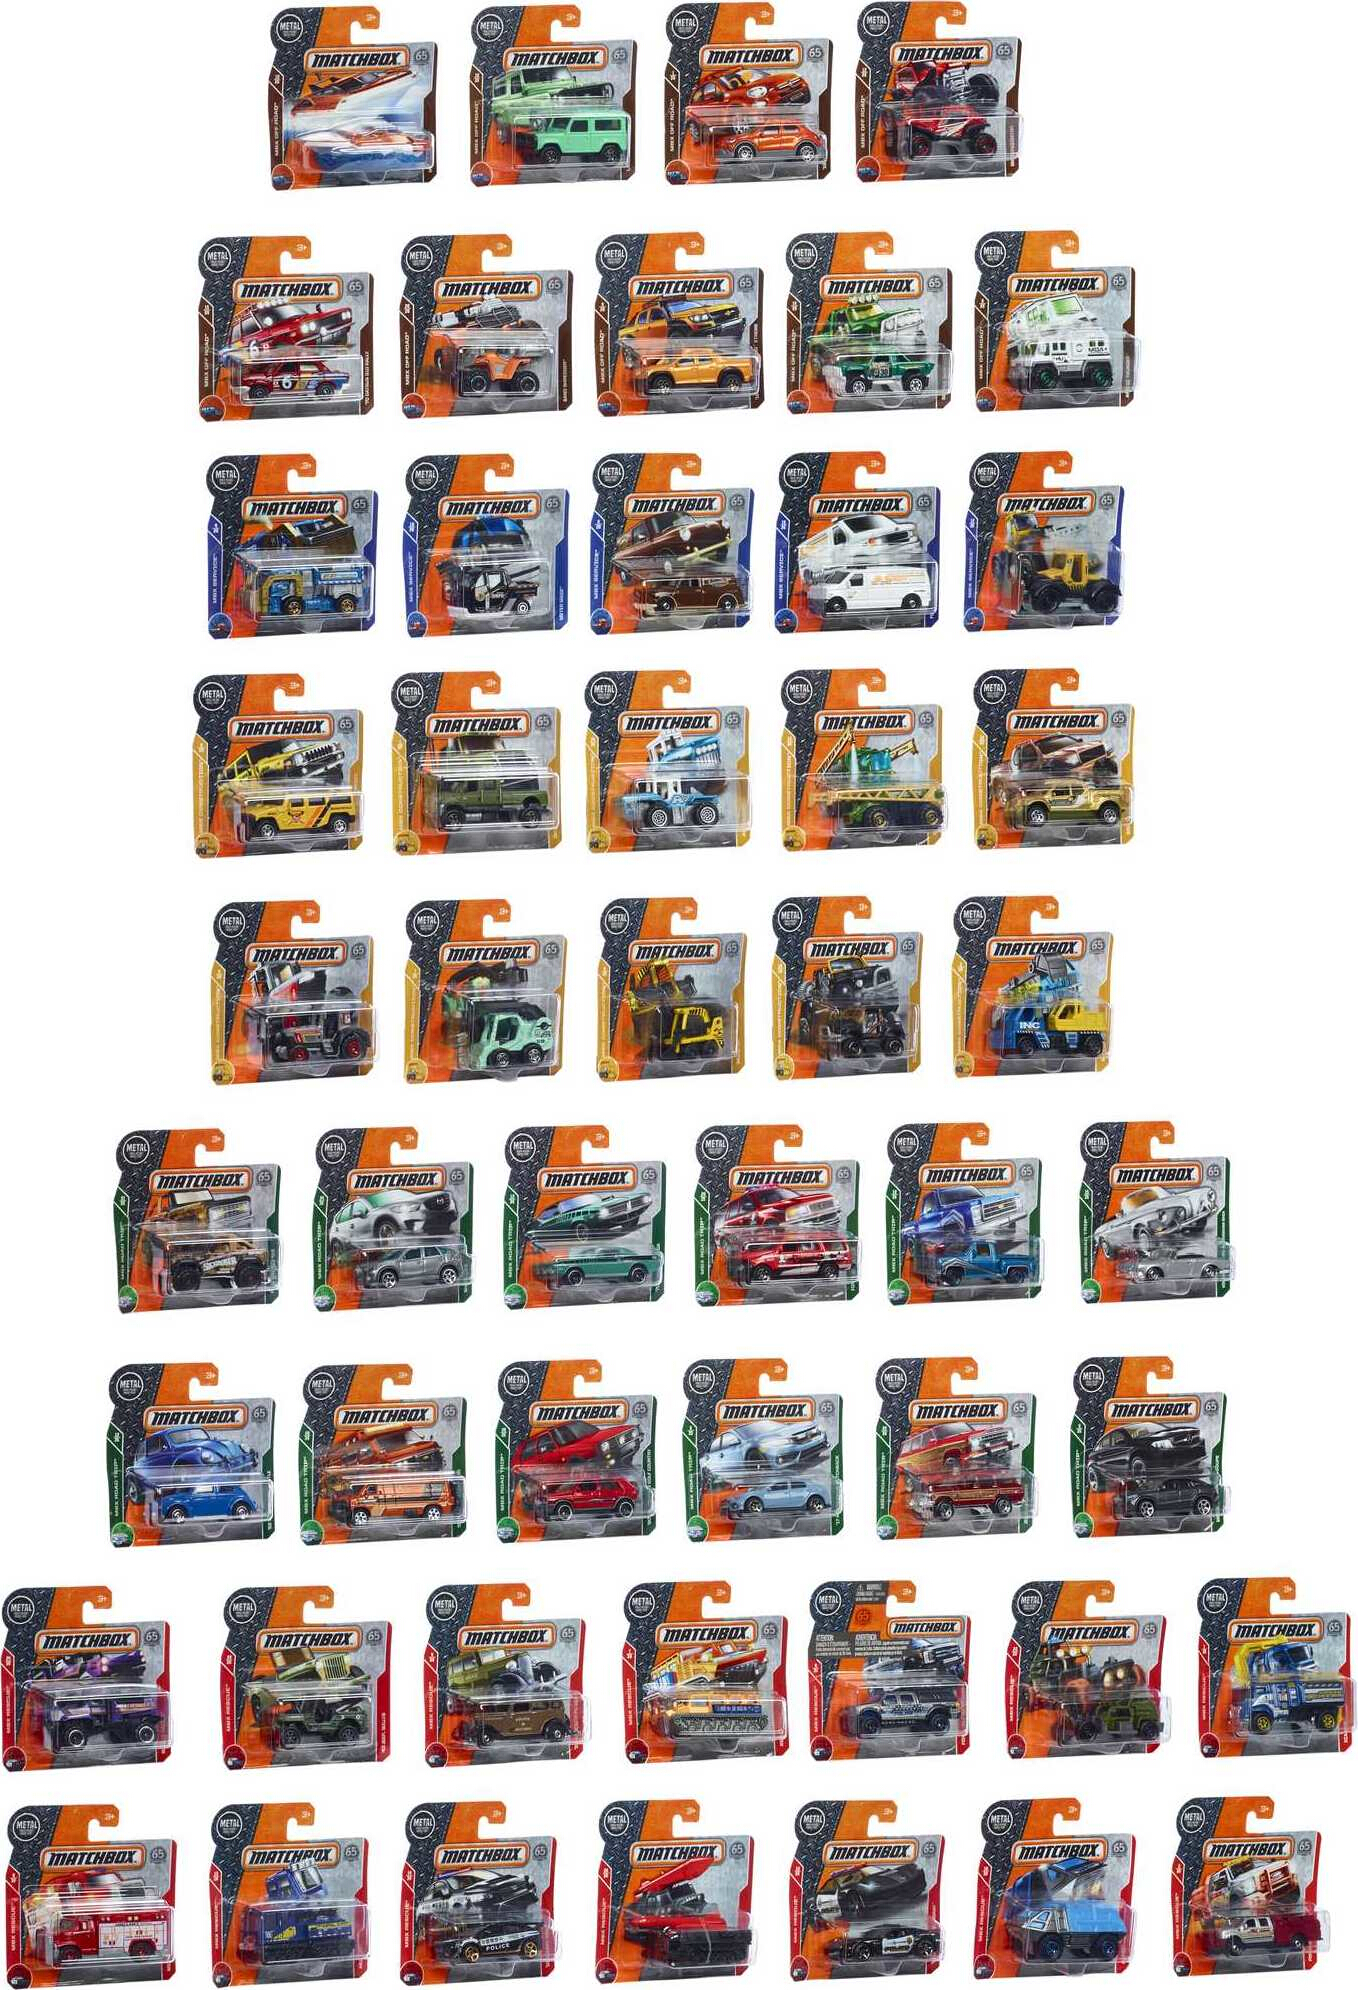 Matchbox Set of 50 Die-Cast Toy Cars or Trucks in 1:64 Scale (Styles May Vary) - image 5 of 5